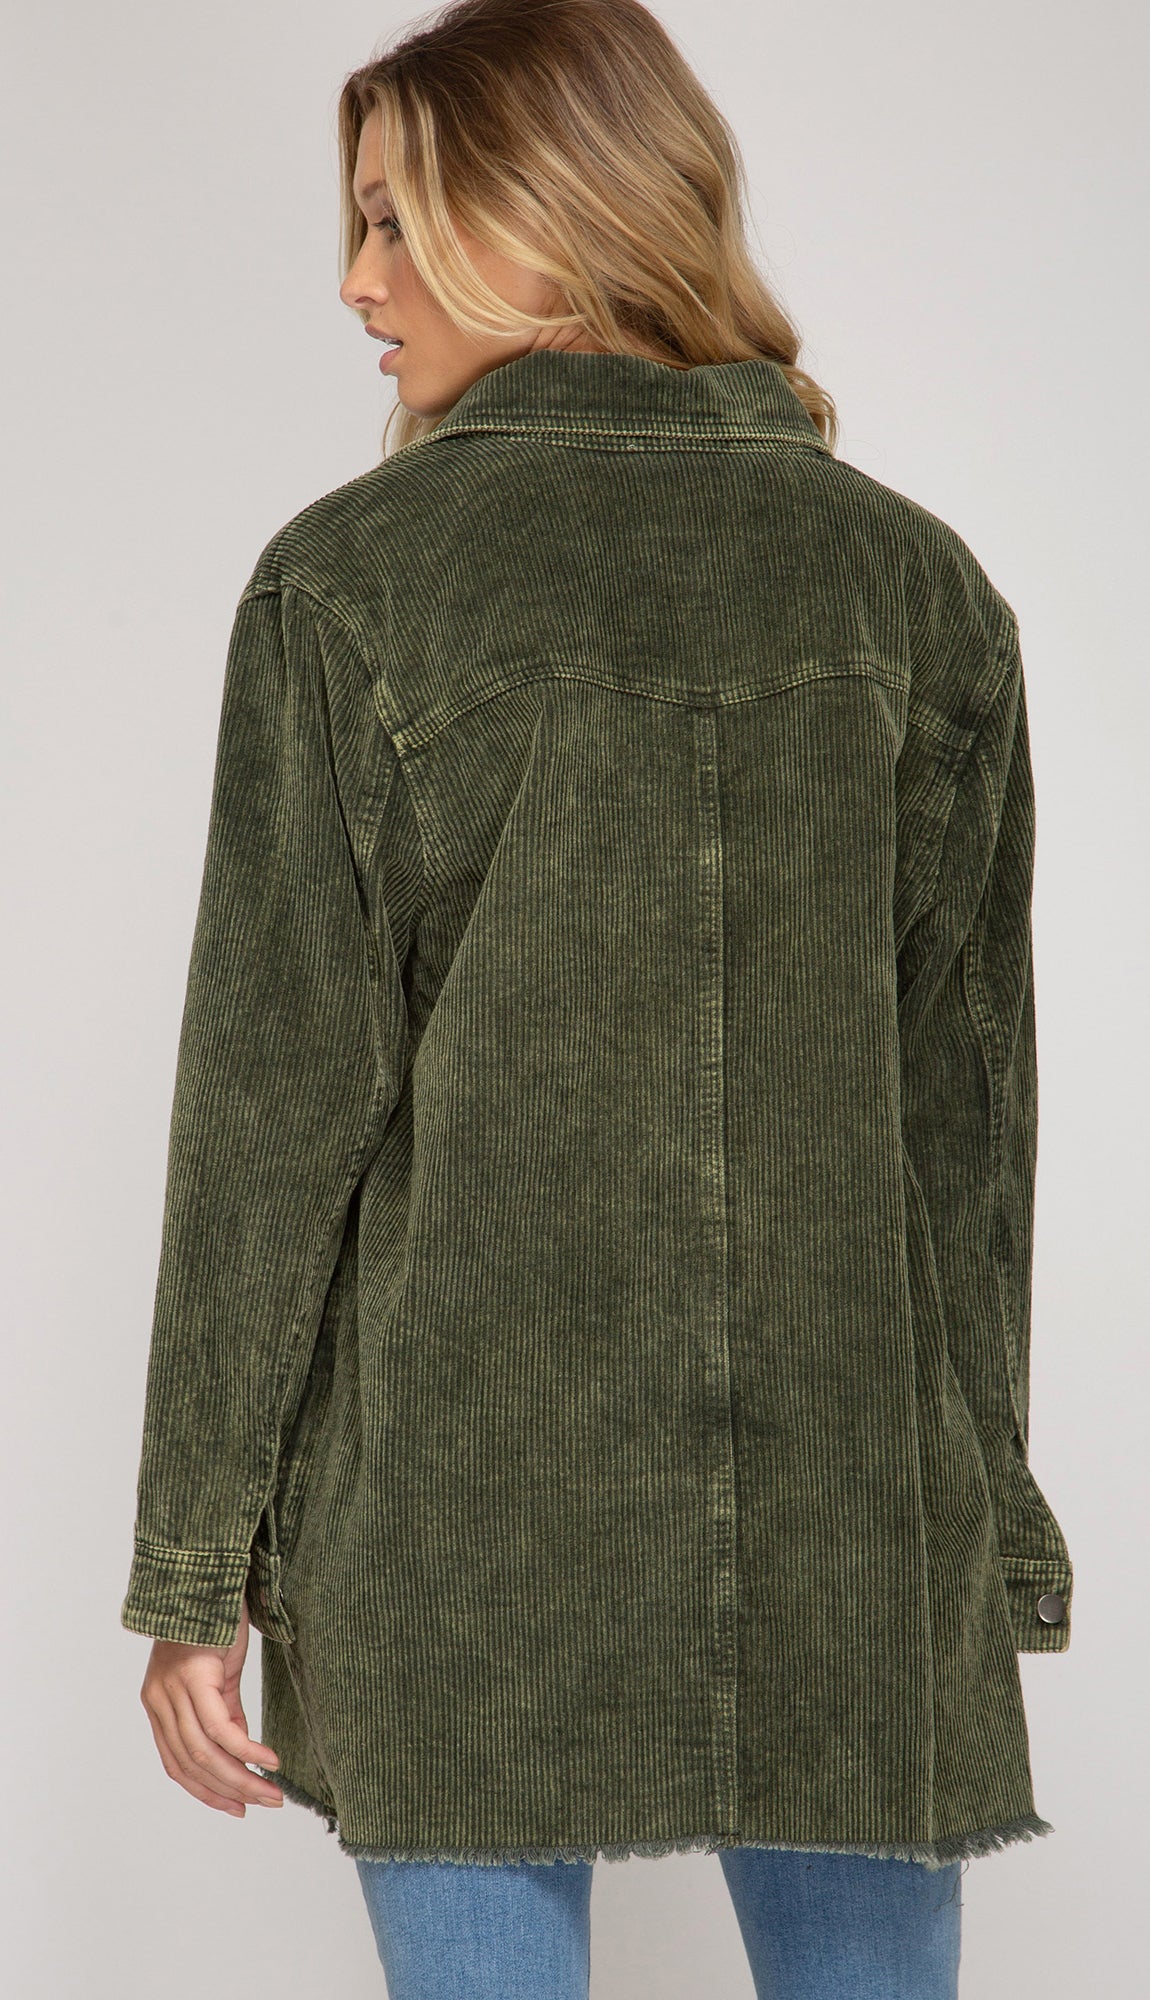 Stakes High Distressed Corduroy Jacket- Olive